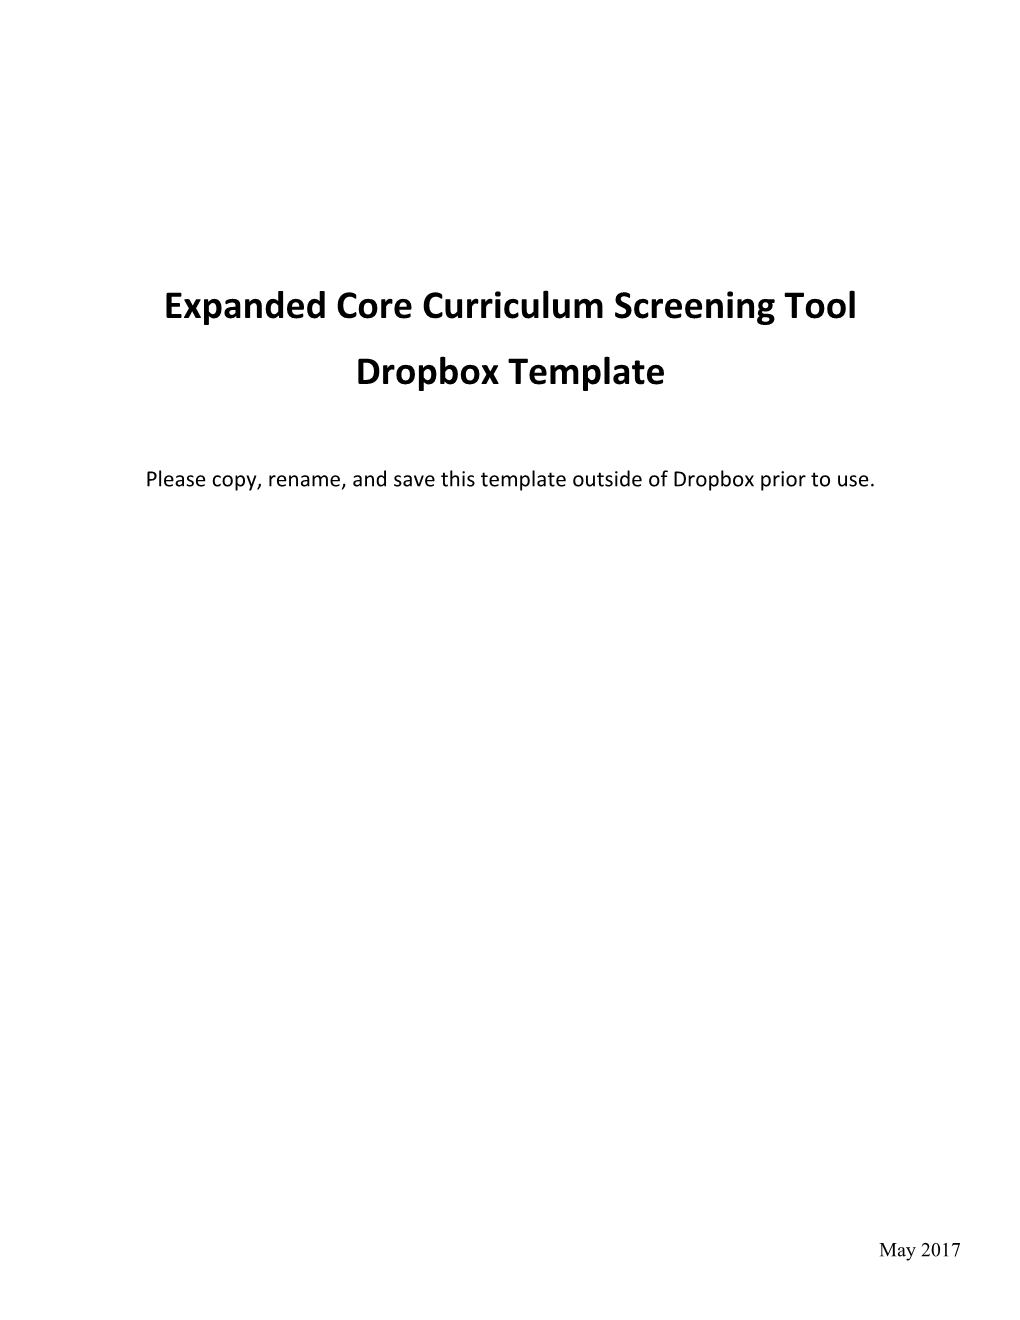 Expanded Core Curriculum Screening Tool